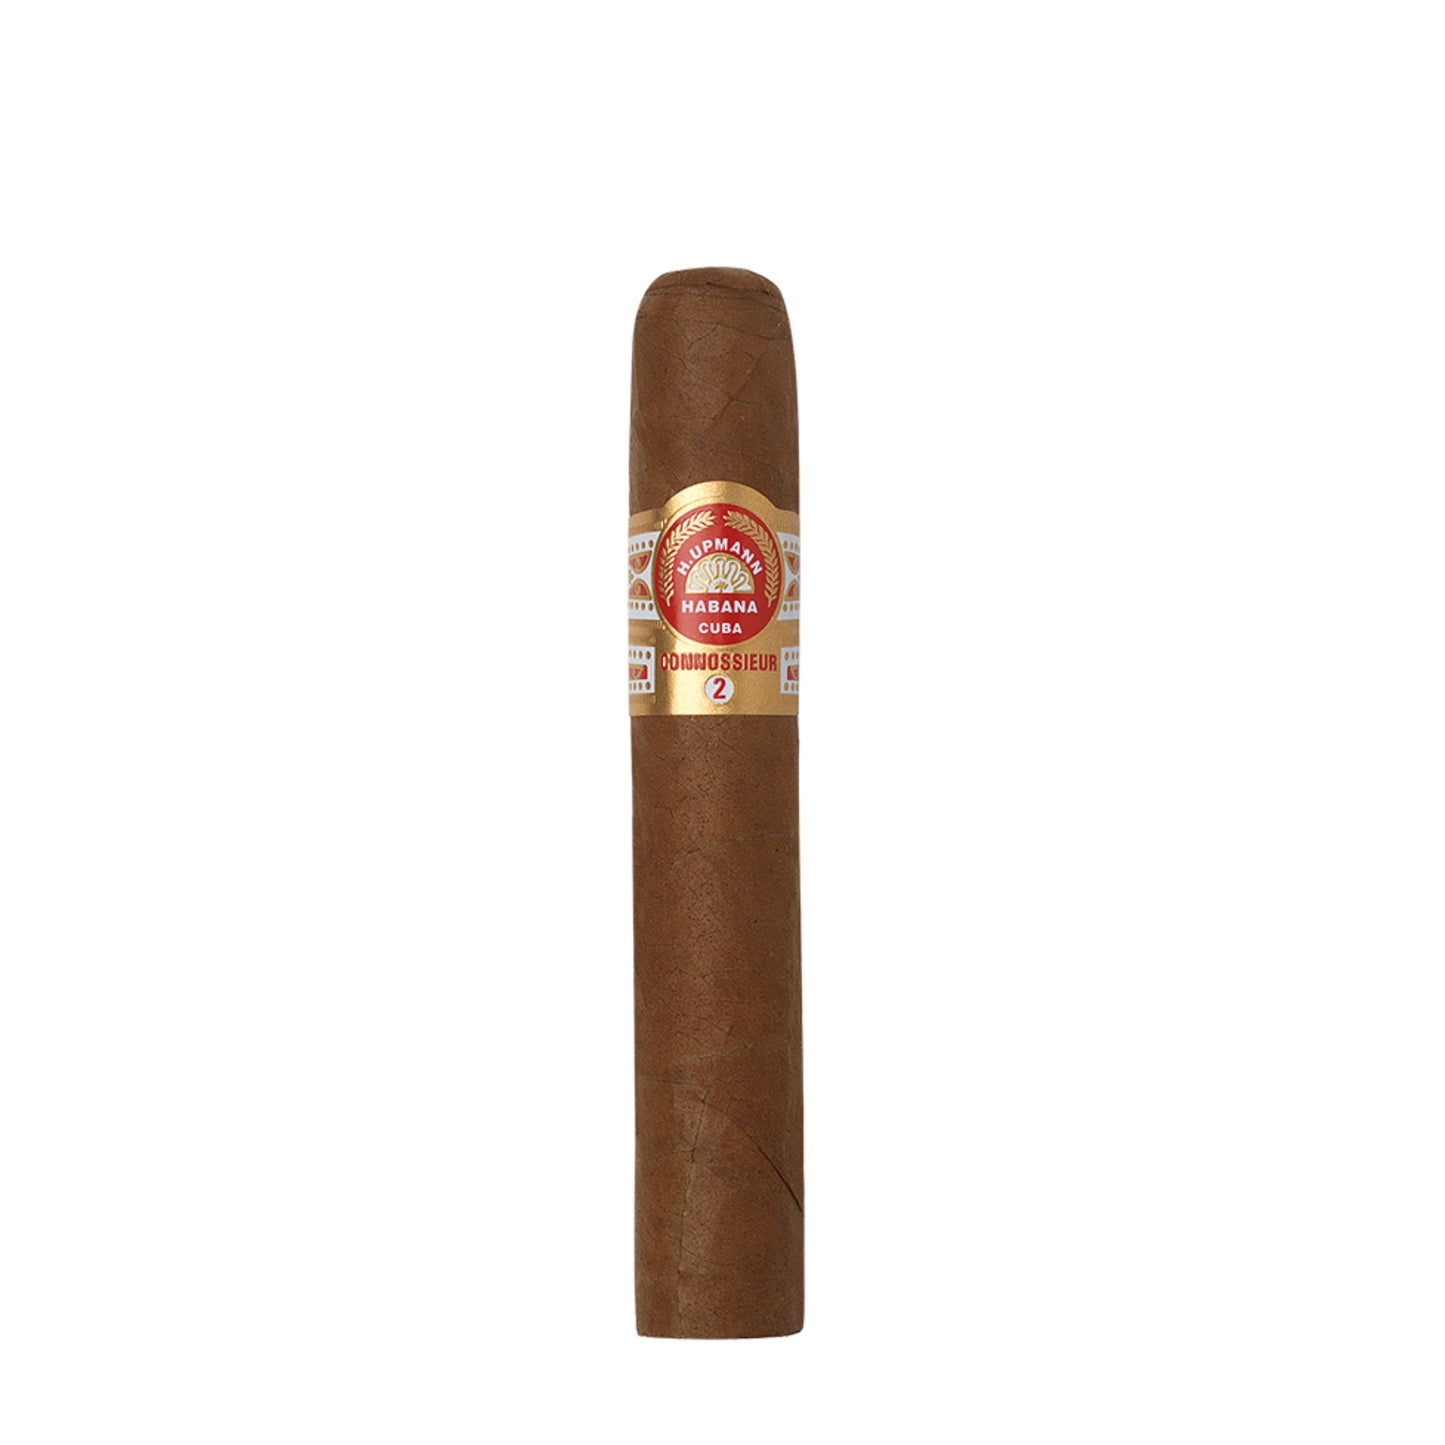 Load image into Gallery viewer, H Upmann Connoisseur No.2
